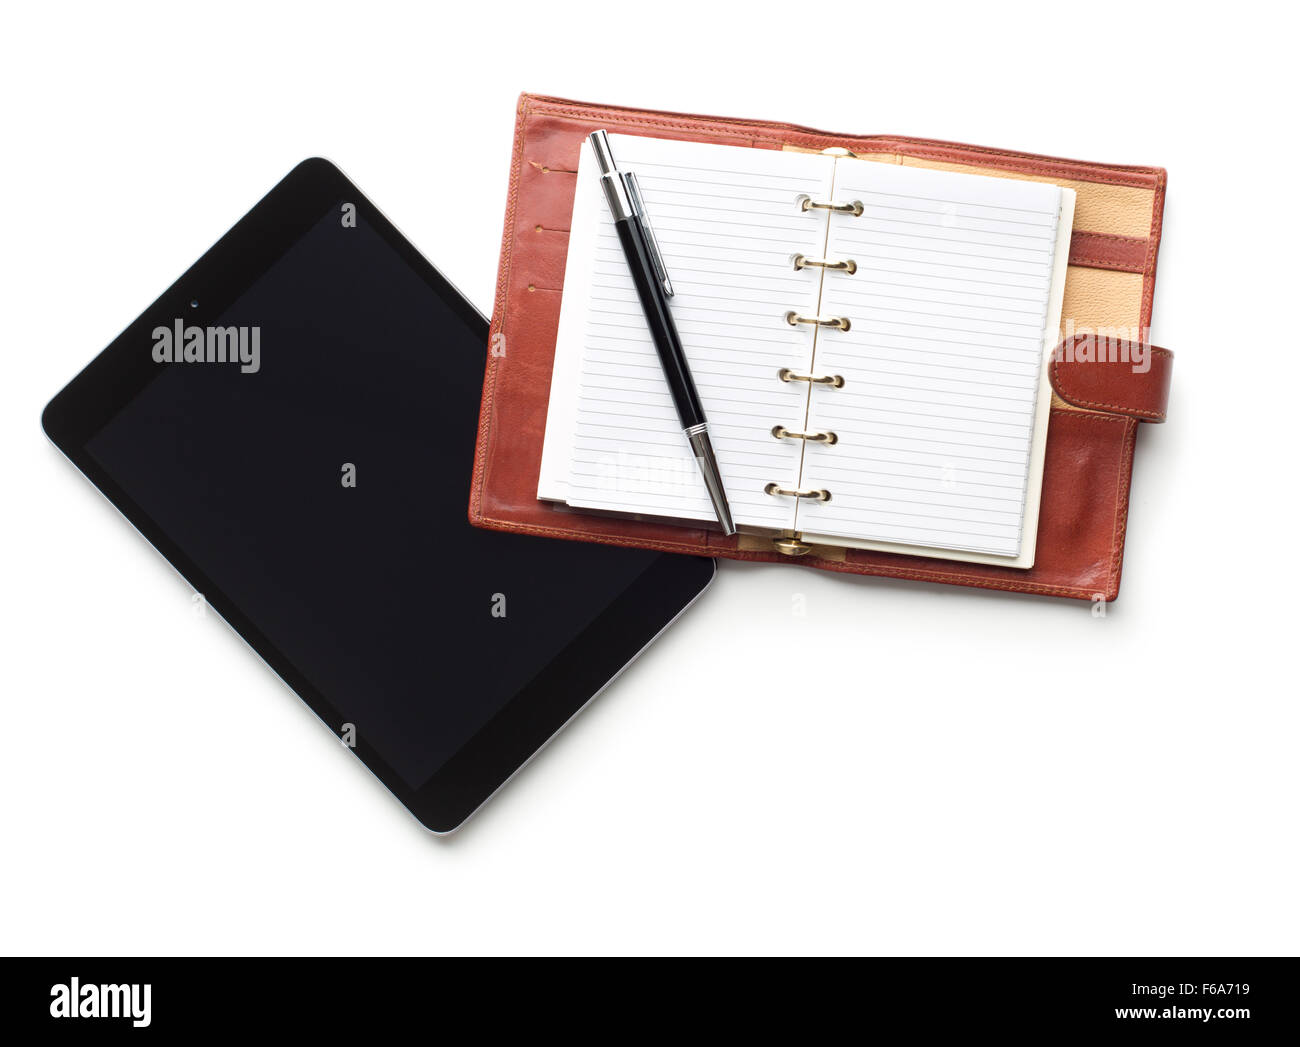 computer tablet with pen and notebook Stock Photo